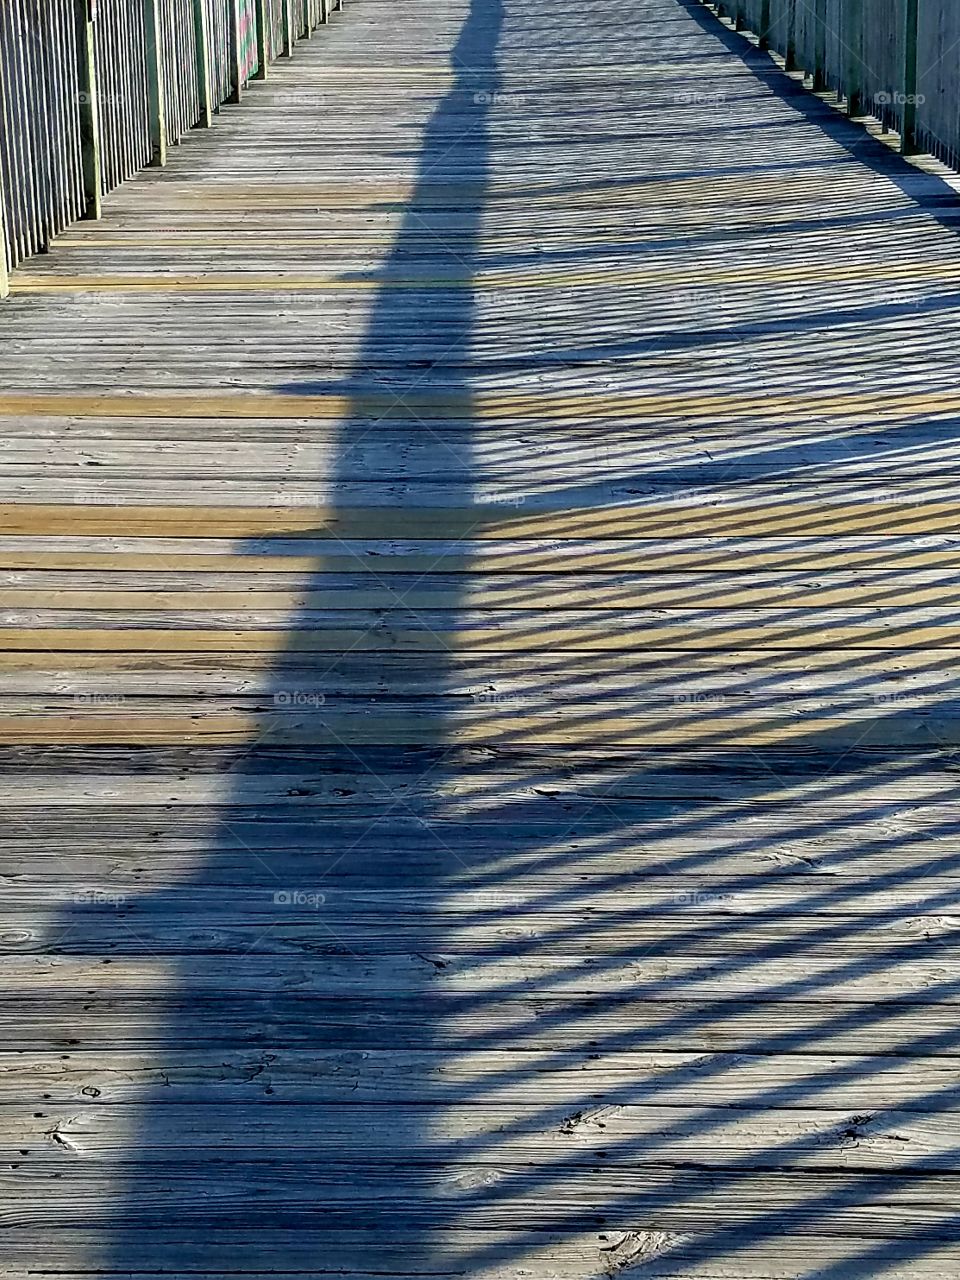 shadow on the pier